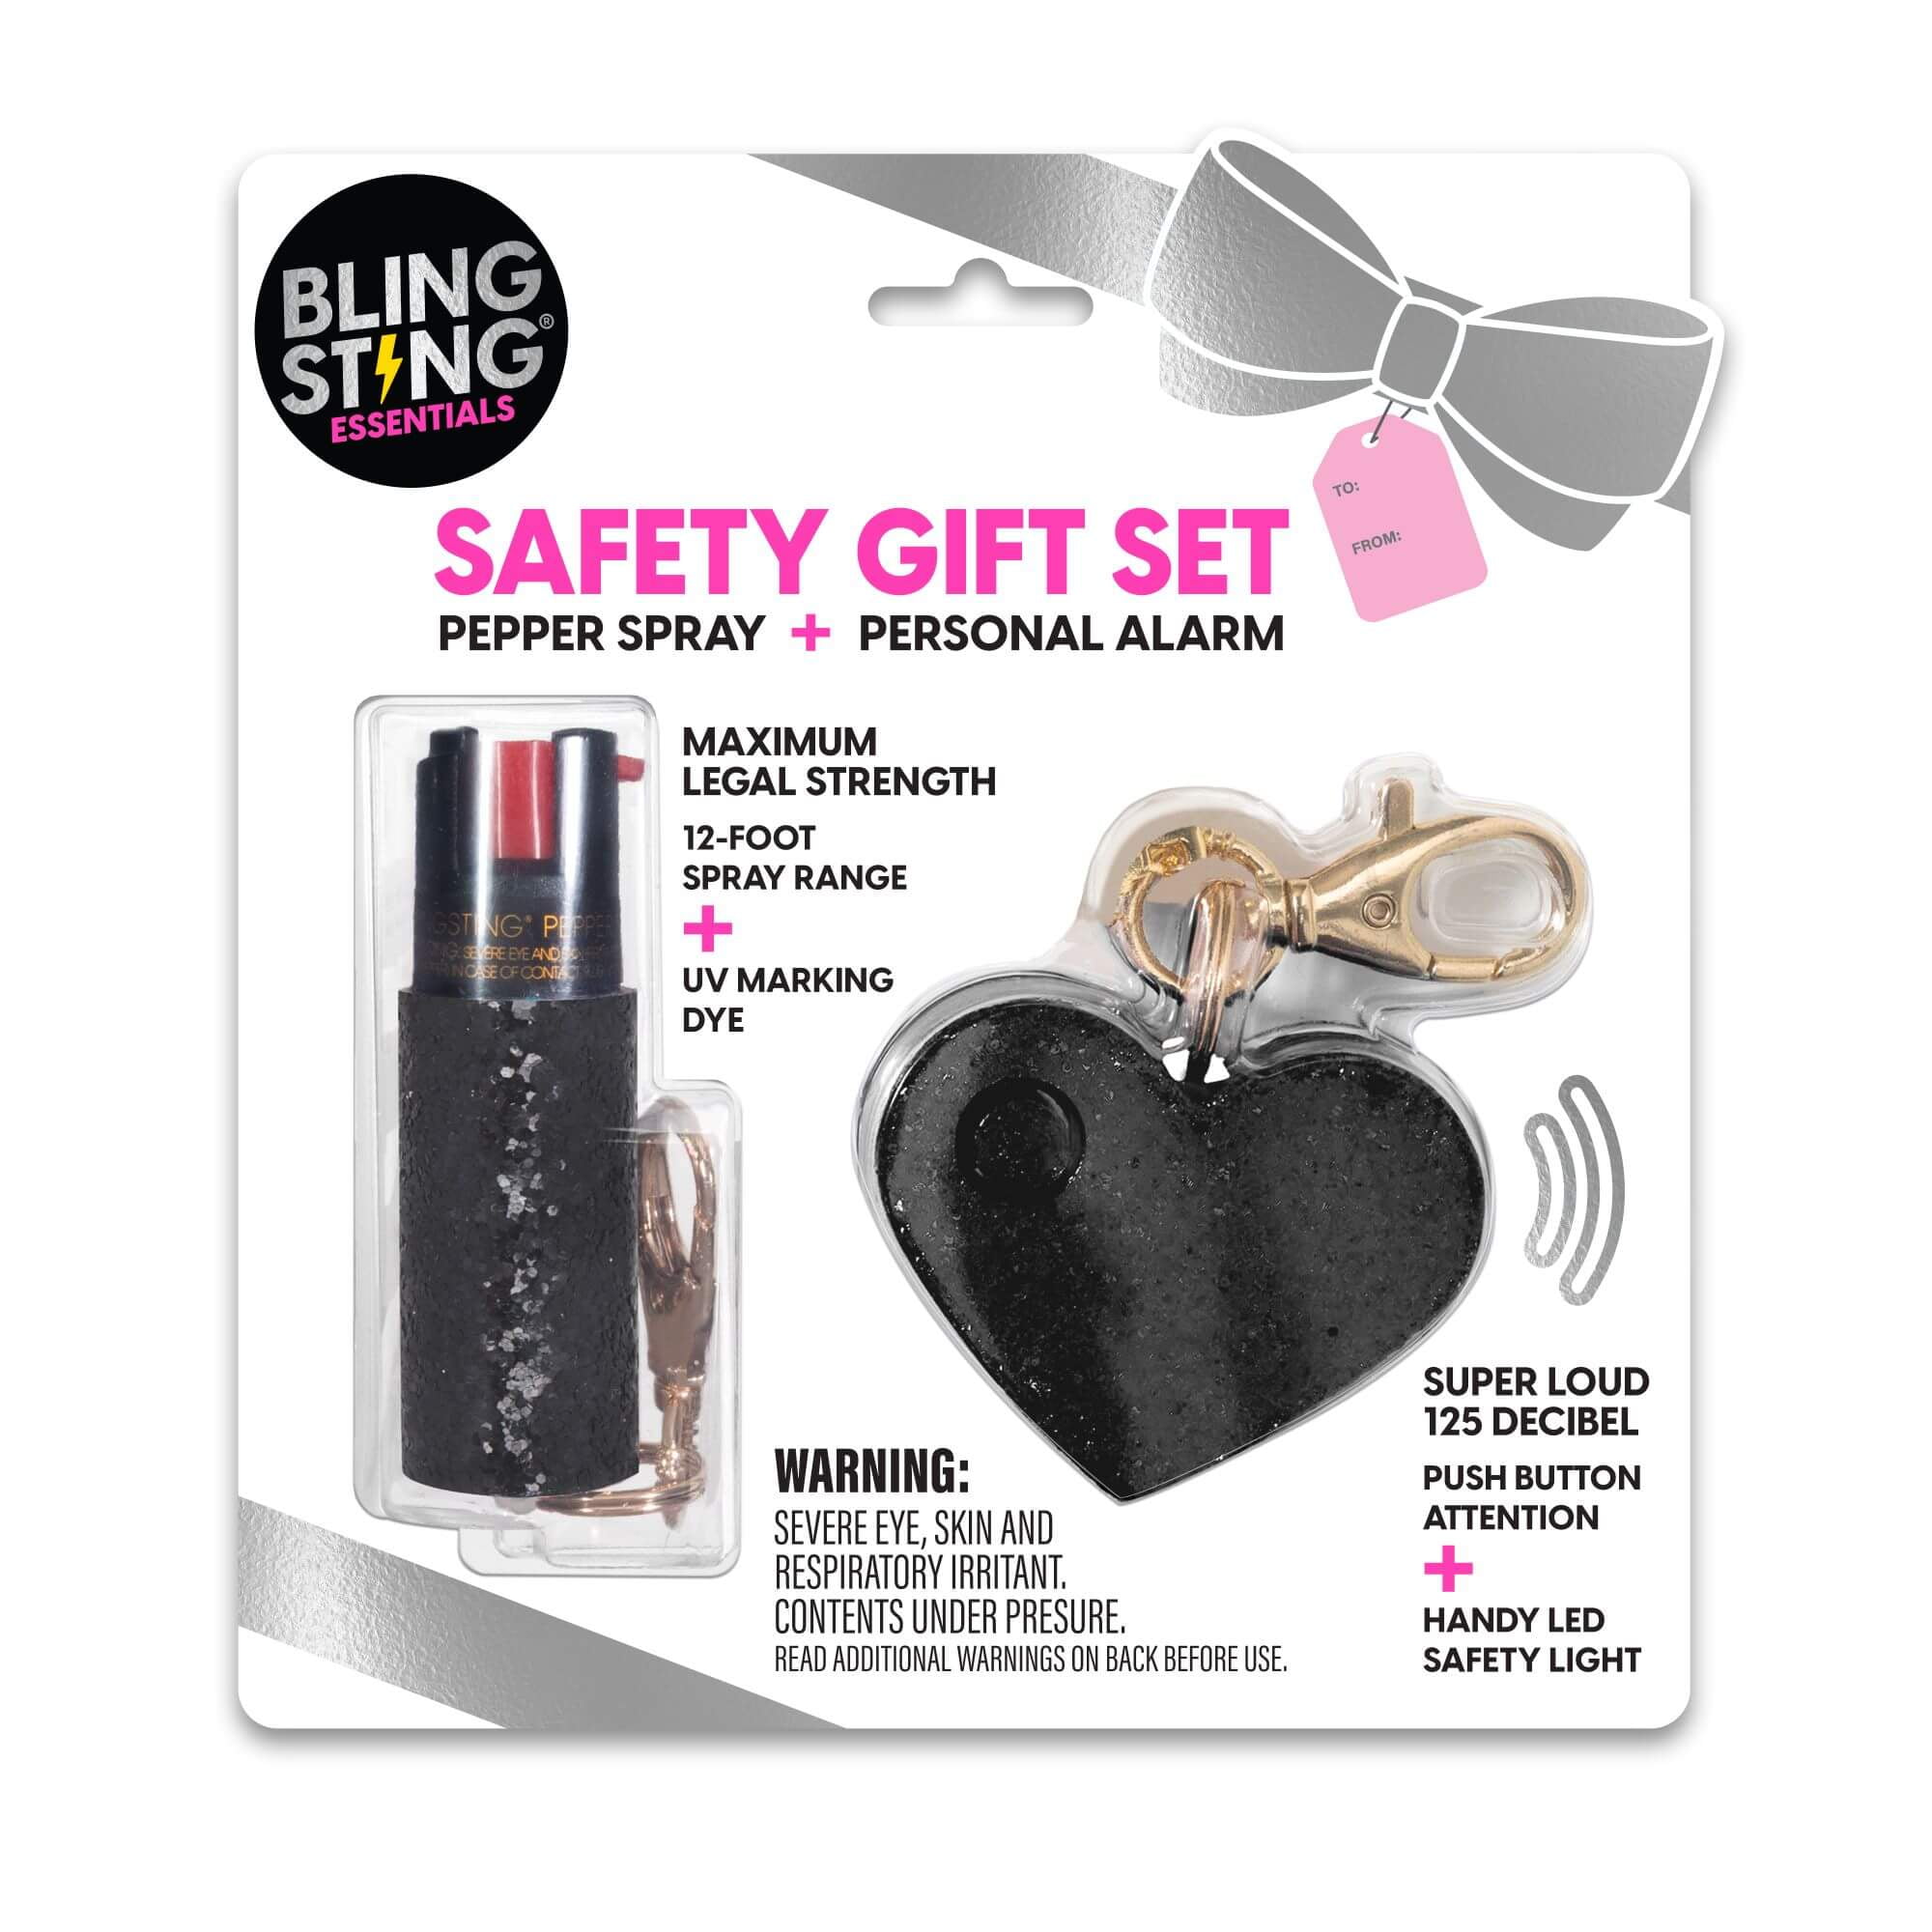 BLINGSTING Essentials Personal Gift Set with Pepper Spray & Safety Alarm  for Women 0.5 oz, Pink 